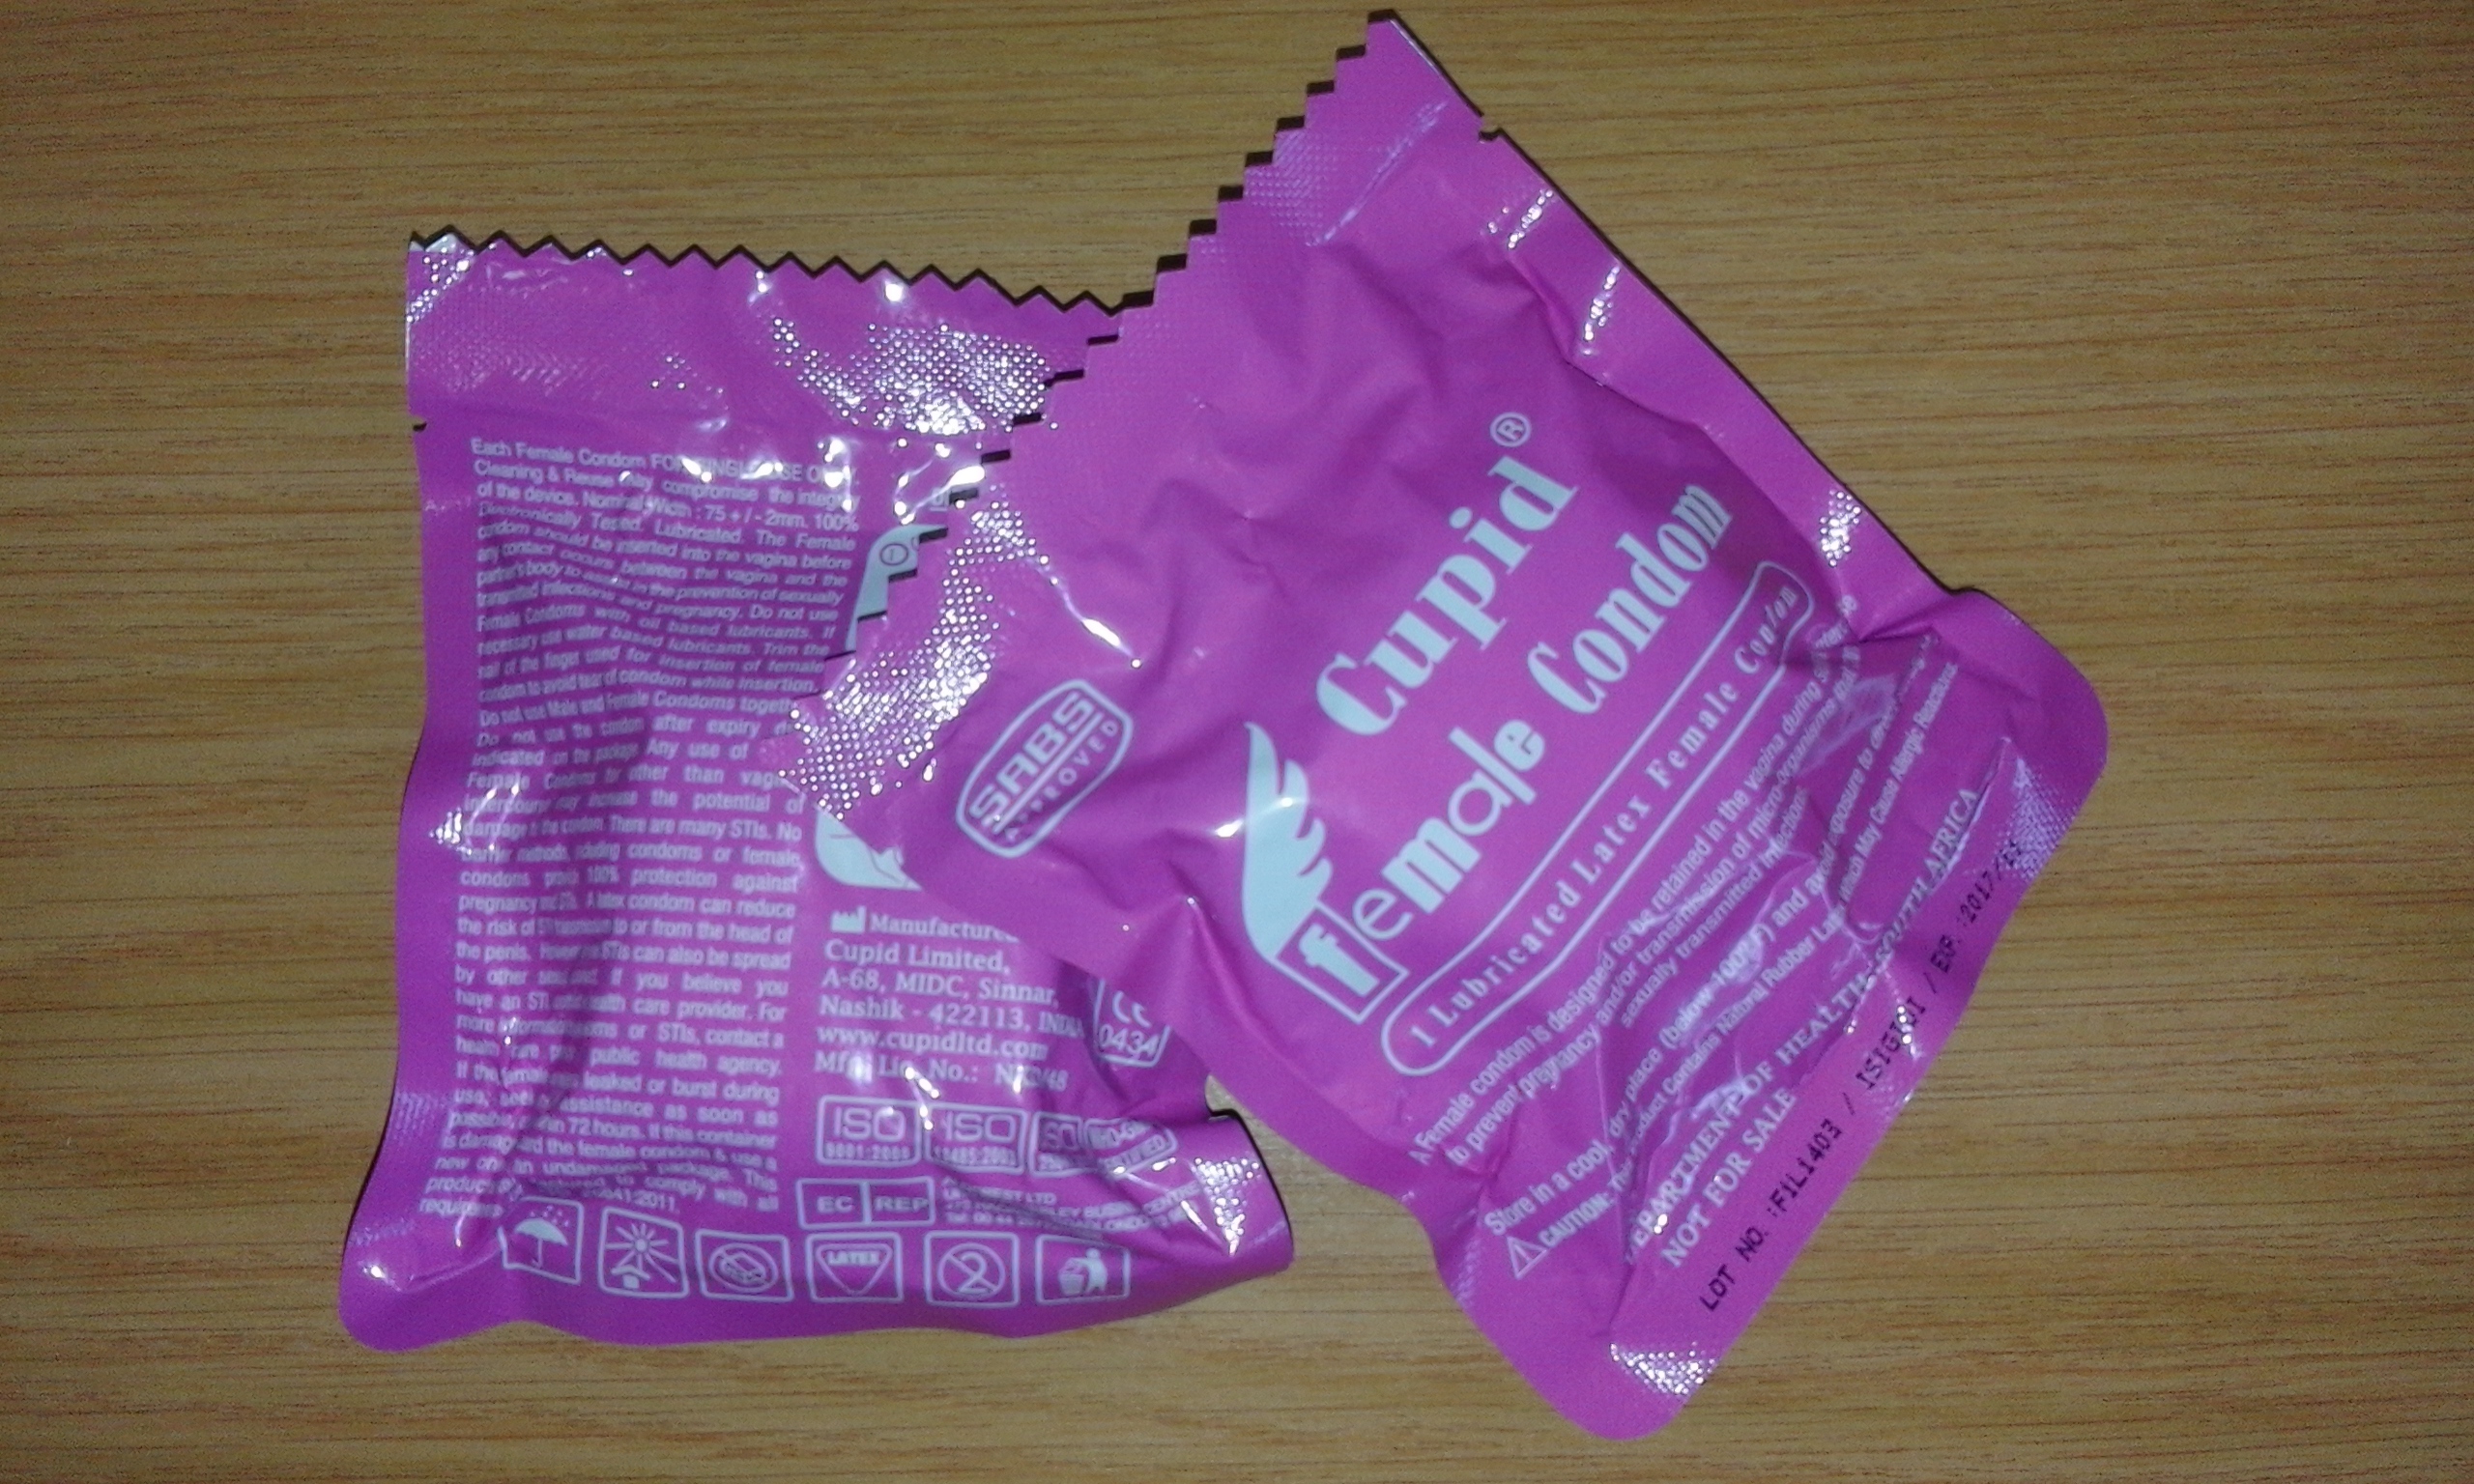 A variation of the Choice condoms, is the female condoms called Femdoms